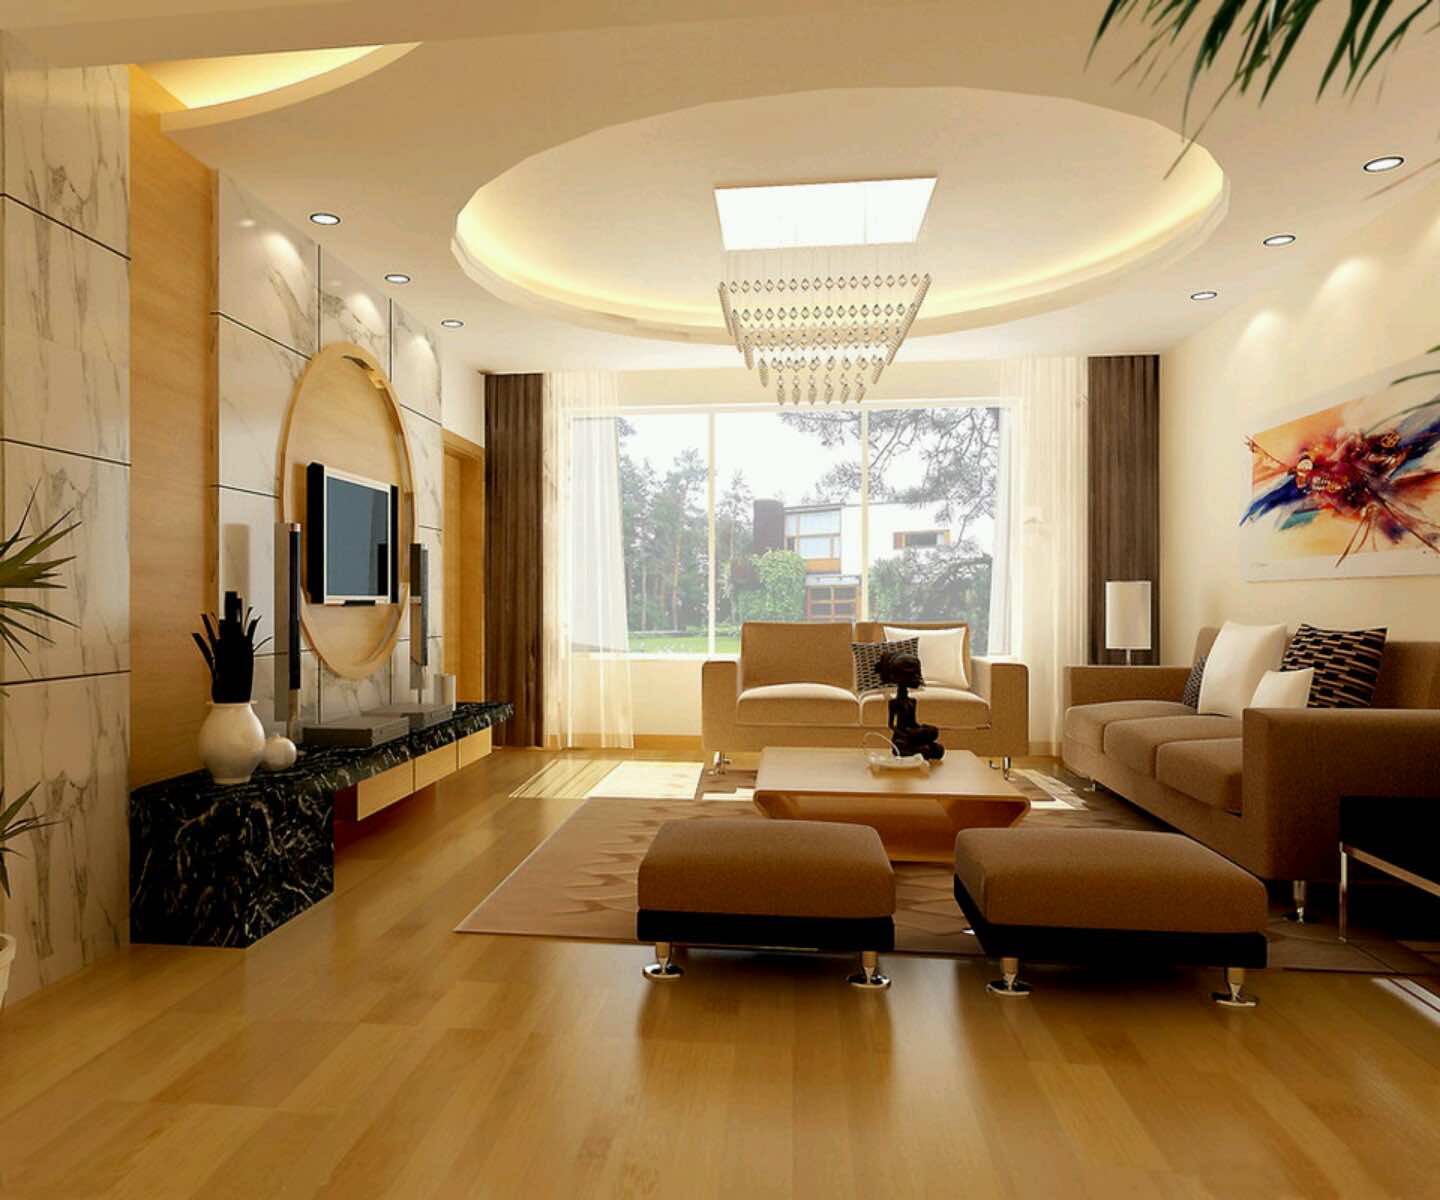 Modern Home Ceiling Ideas with Simple Decor